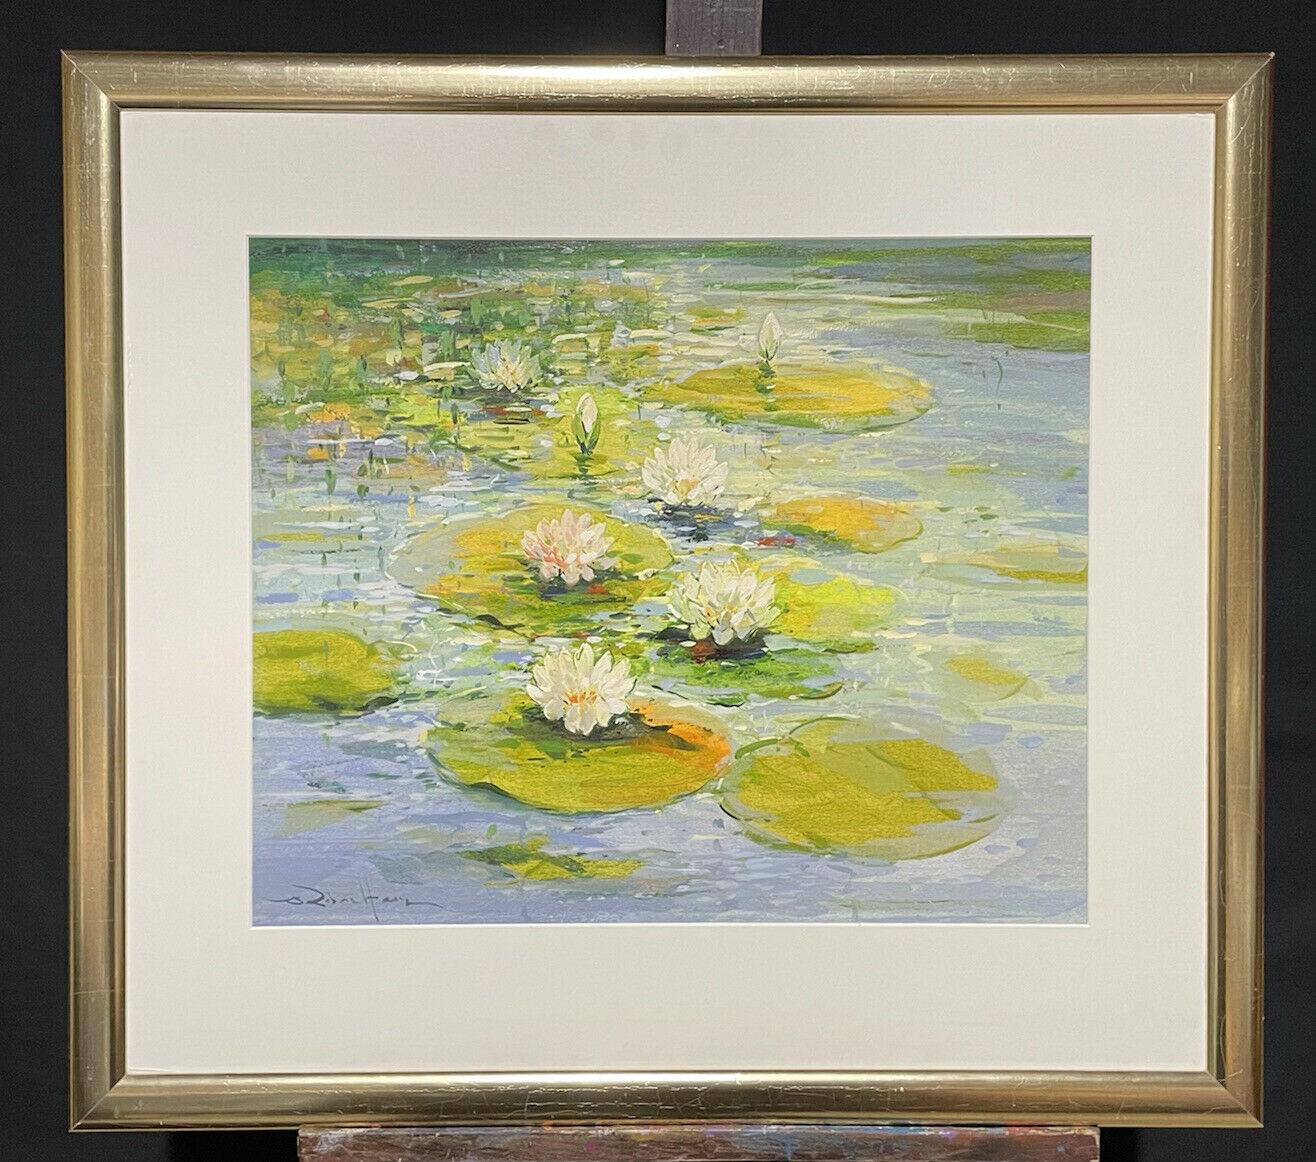 LARGE IMPRESSIONIST SIGNED PAINTING - THE WATERLILY POND - Painting by Robert de Haan